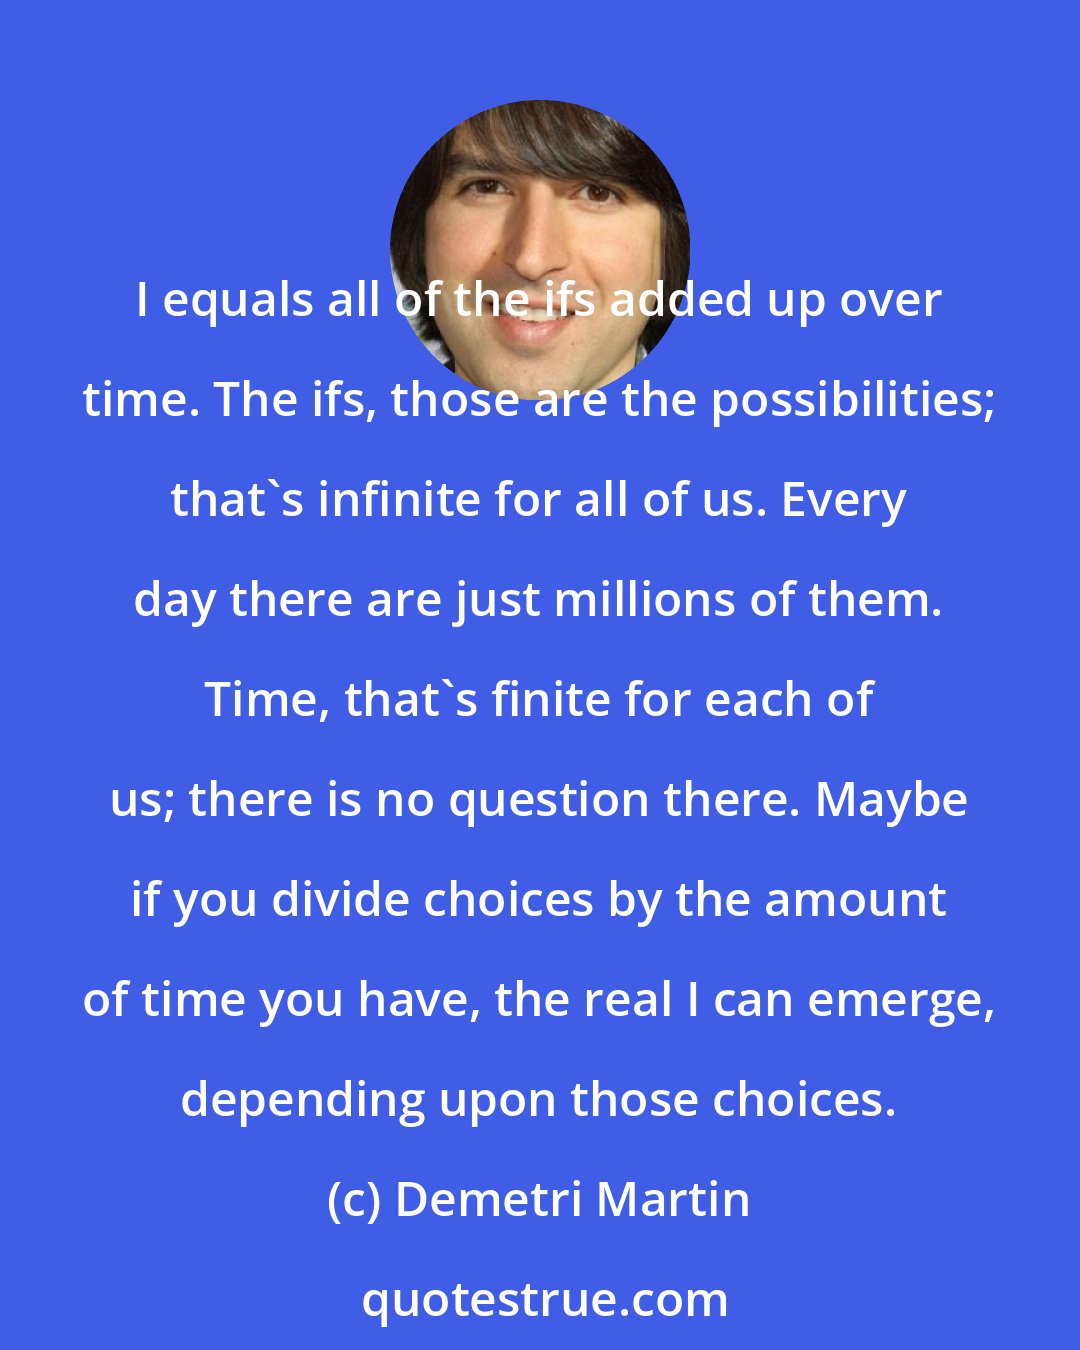 Demetri Martin: I equals all of the ifs added up over time. The ifs, those are the possibilities; that's infinite for all of us. Every day there are just millions of them. Time, that's finite for each of us; there is no question there. Maybe if you divide choices by the amount of time you have, the real I can emerge, depending upon those choices.